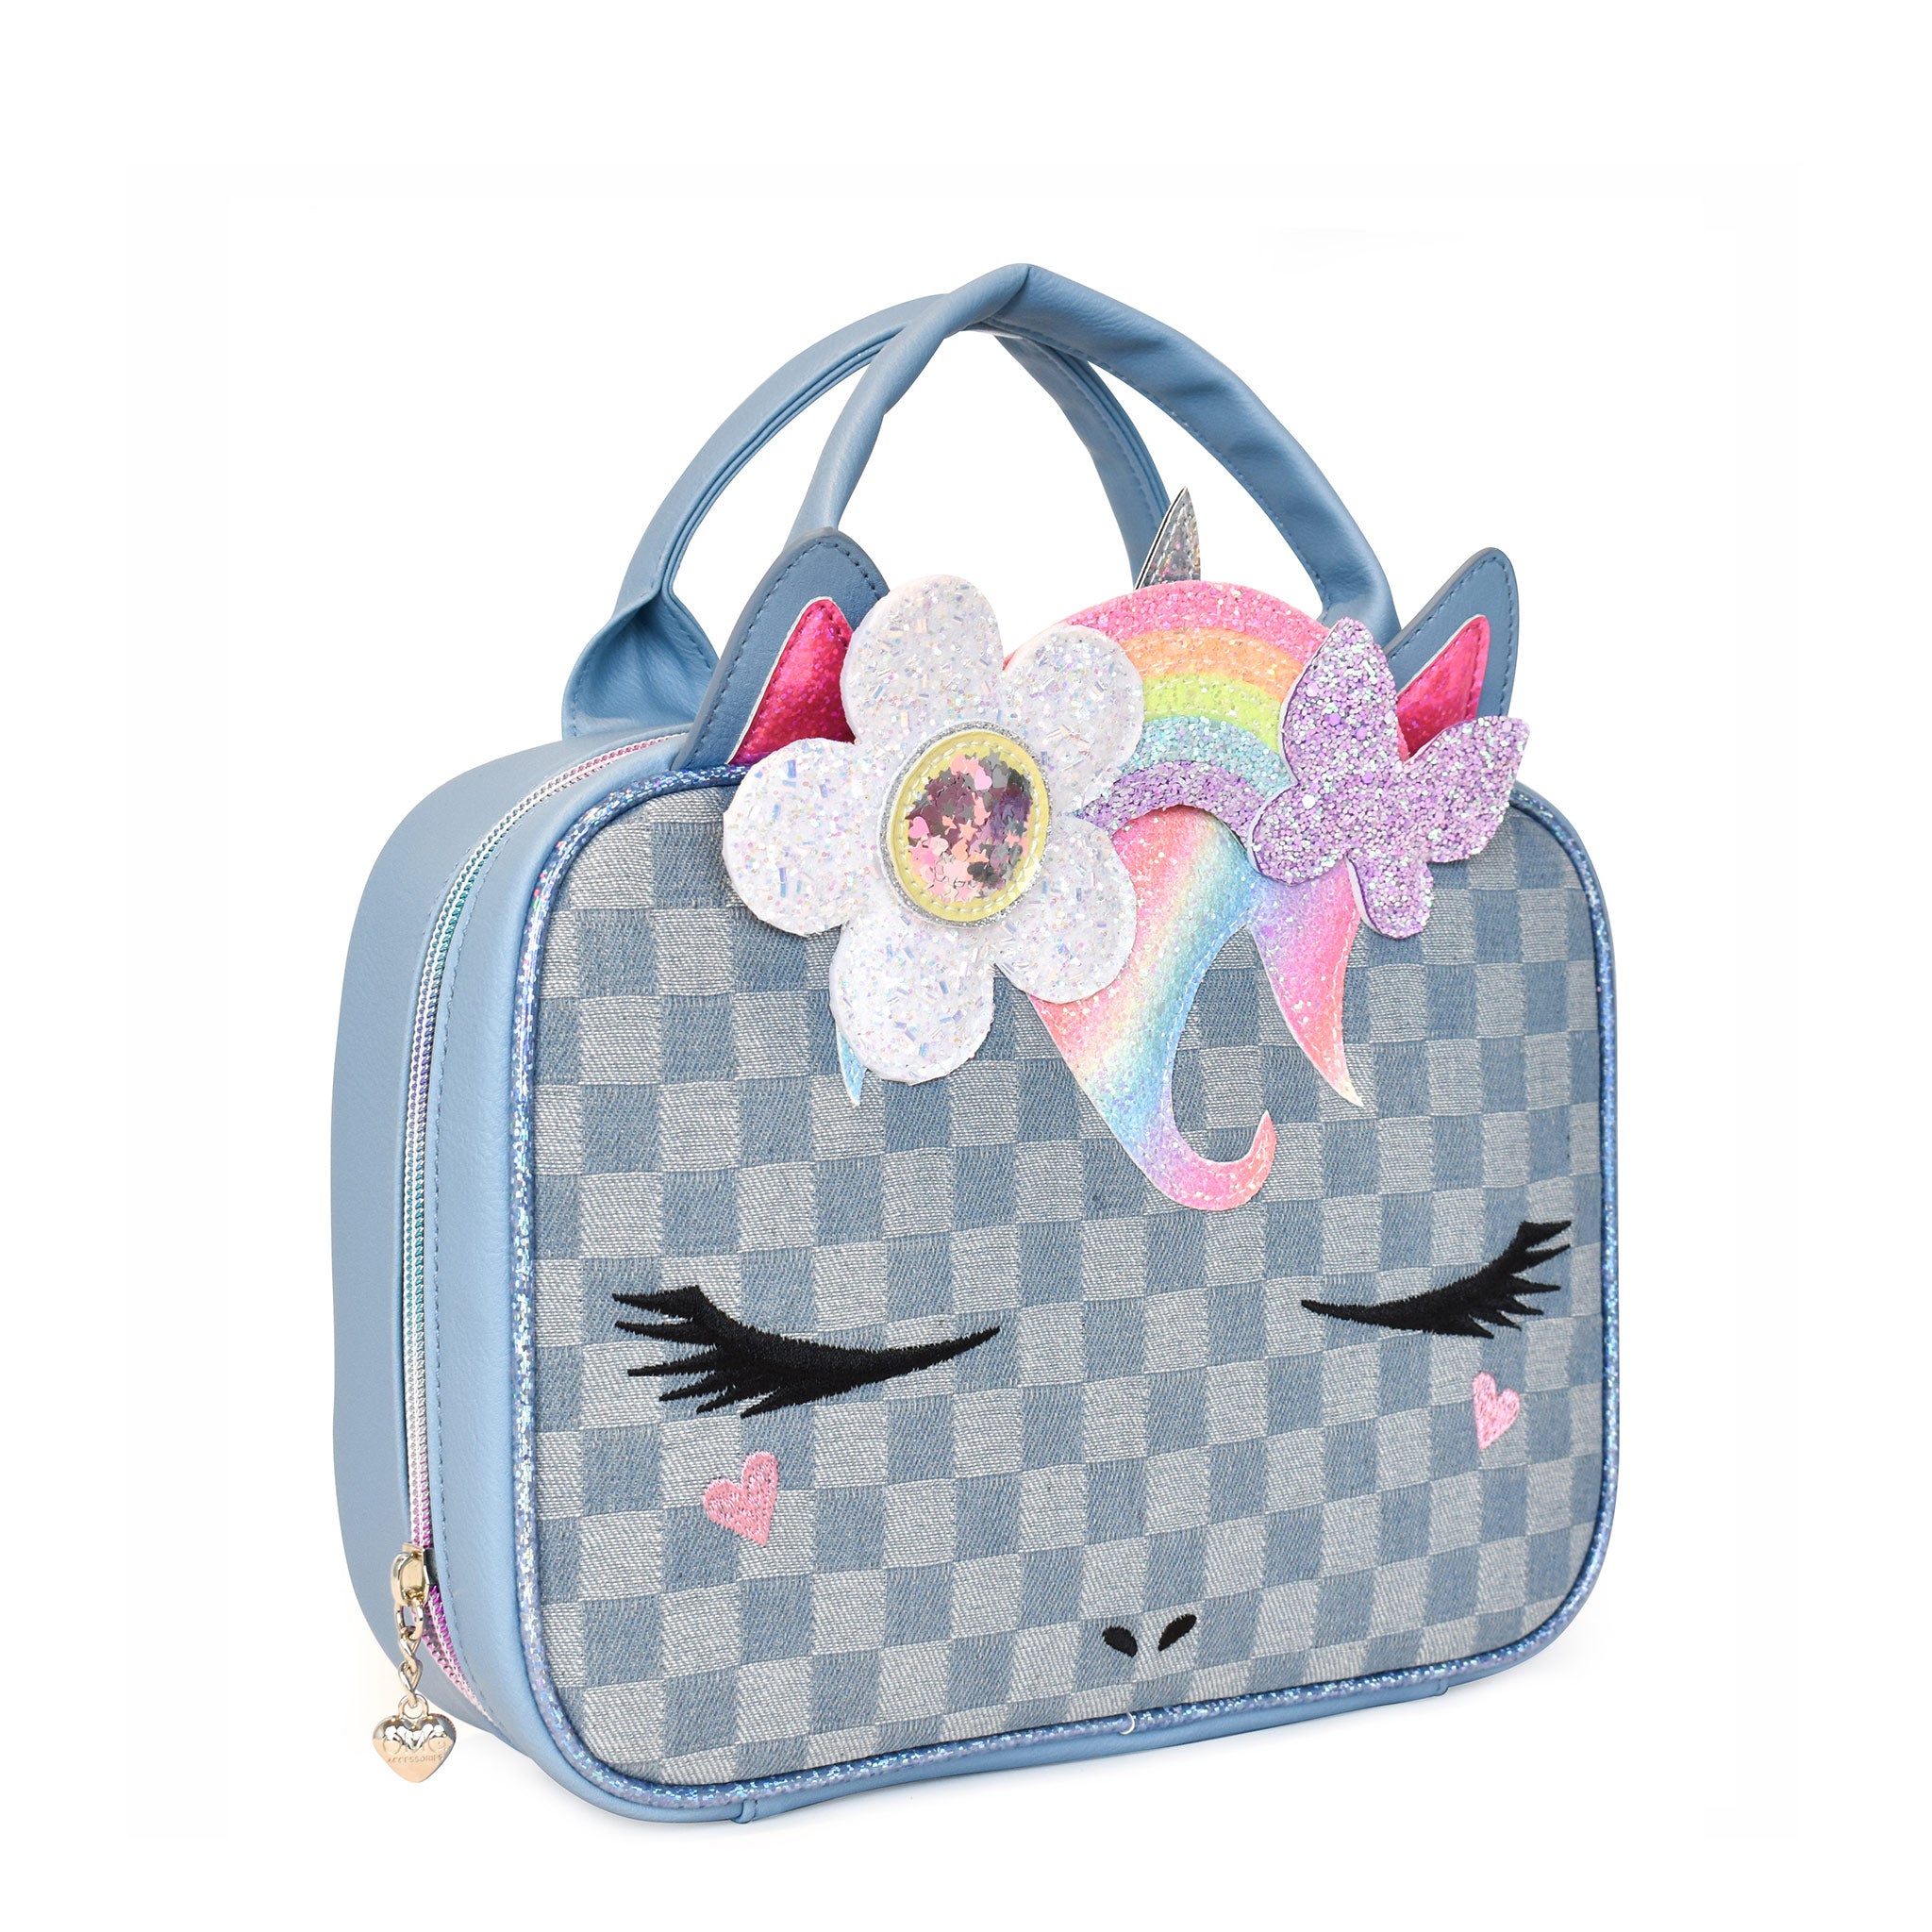 Side view of a unicorn face denim checkerboard print lunch bag with a daisy rainbow crown applique